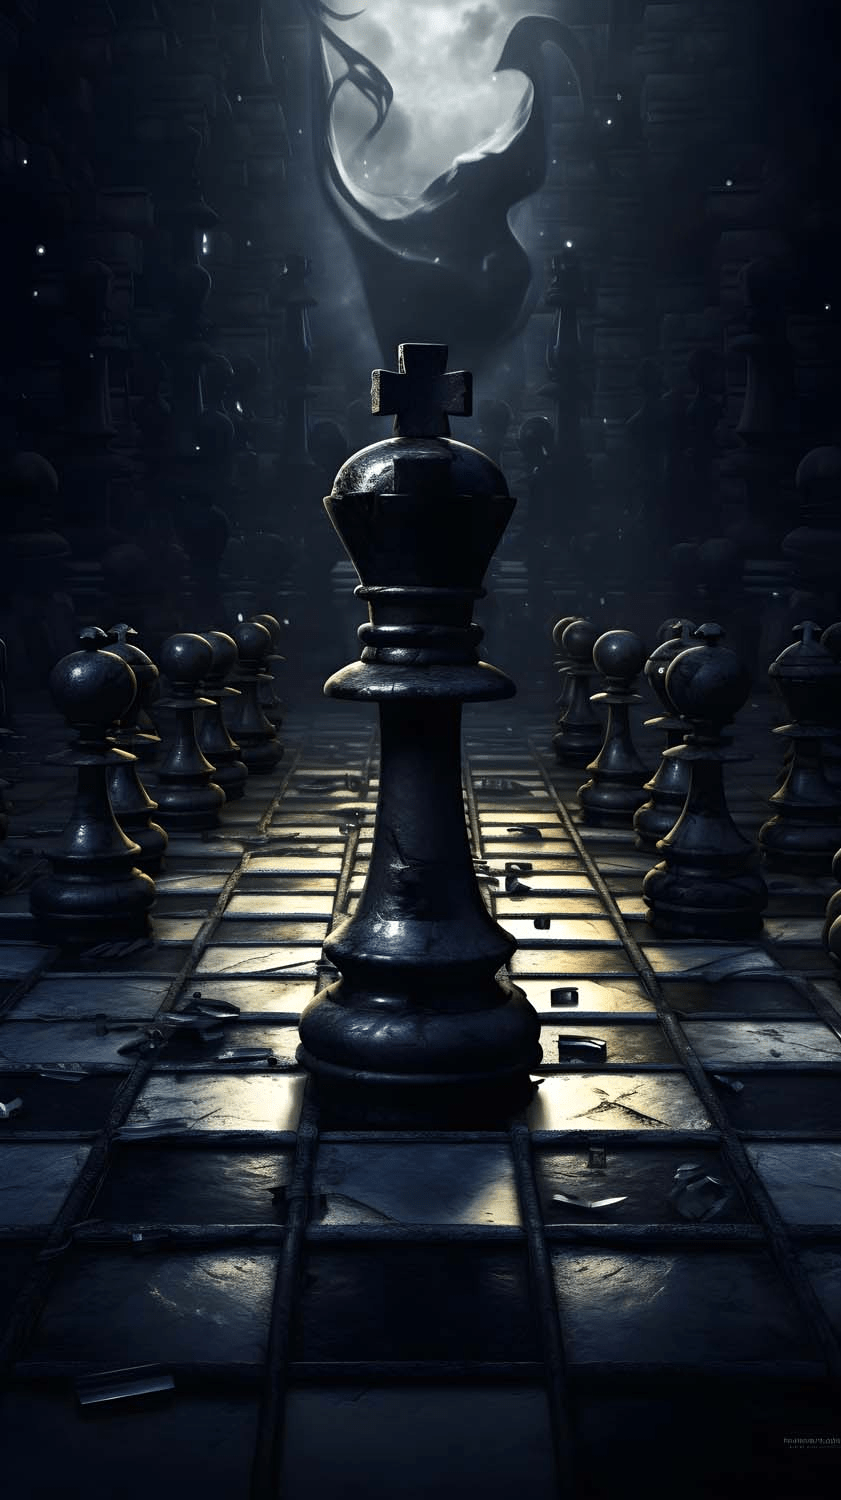 A black and white chessboard with a black king in the center. - Chess